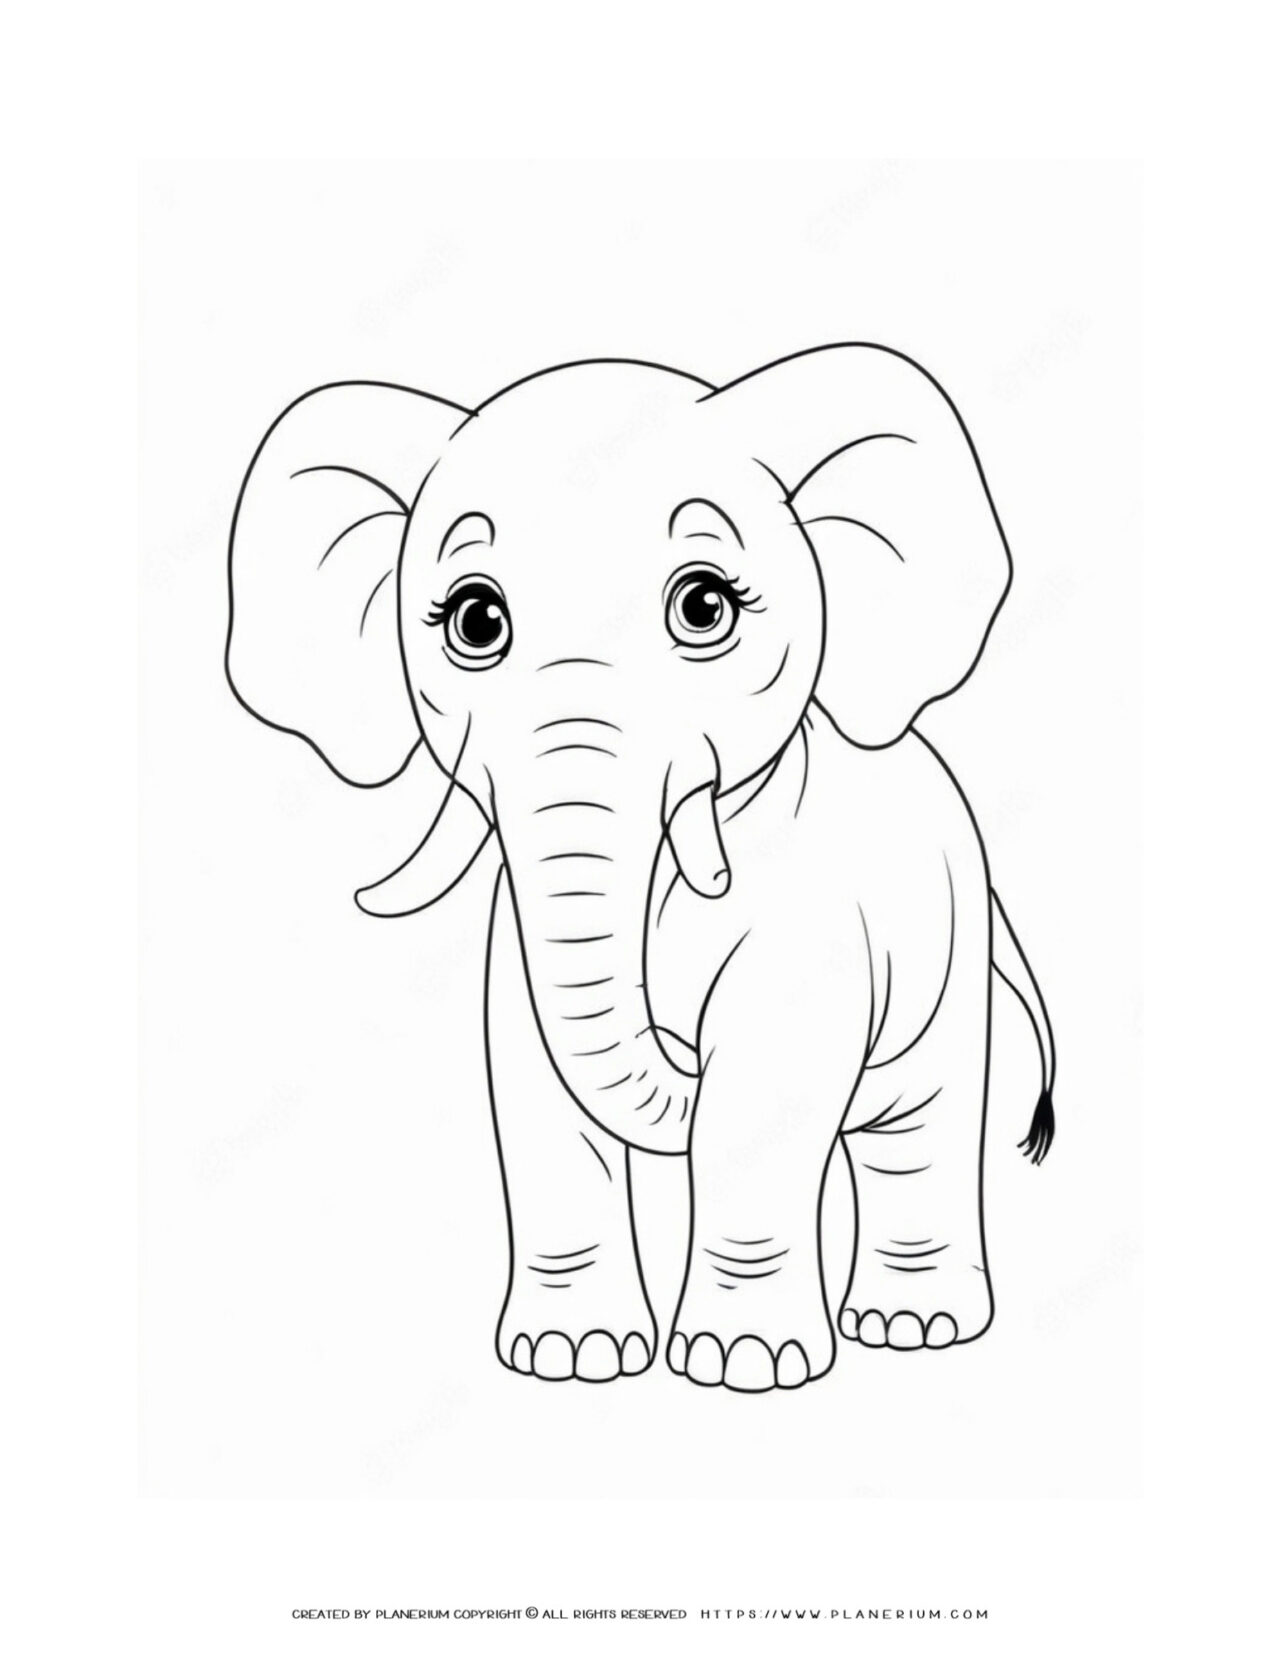 Big-Elephant-Standing-Comic-Style-Coloring-Page-for-Kids